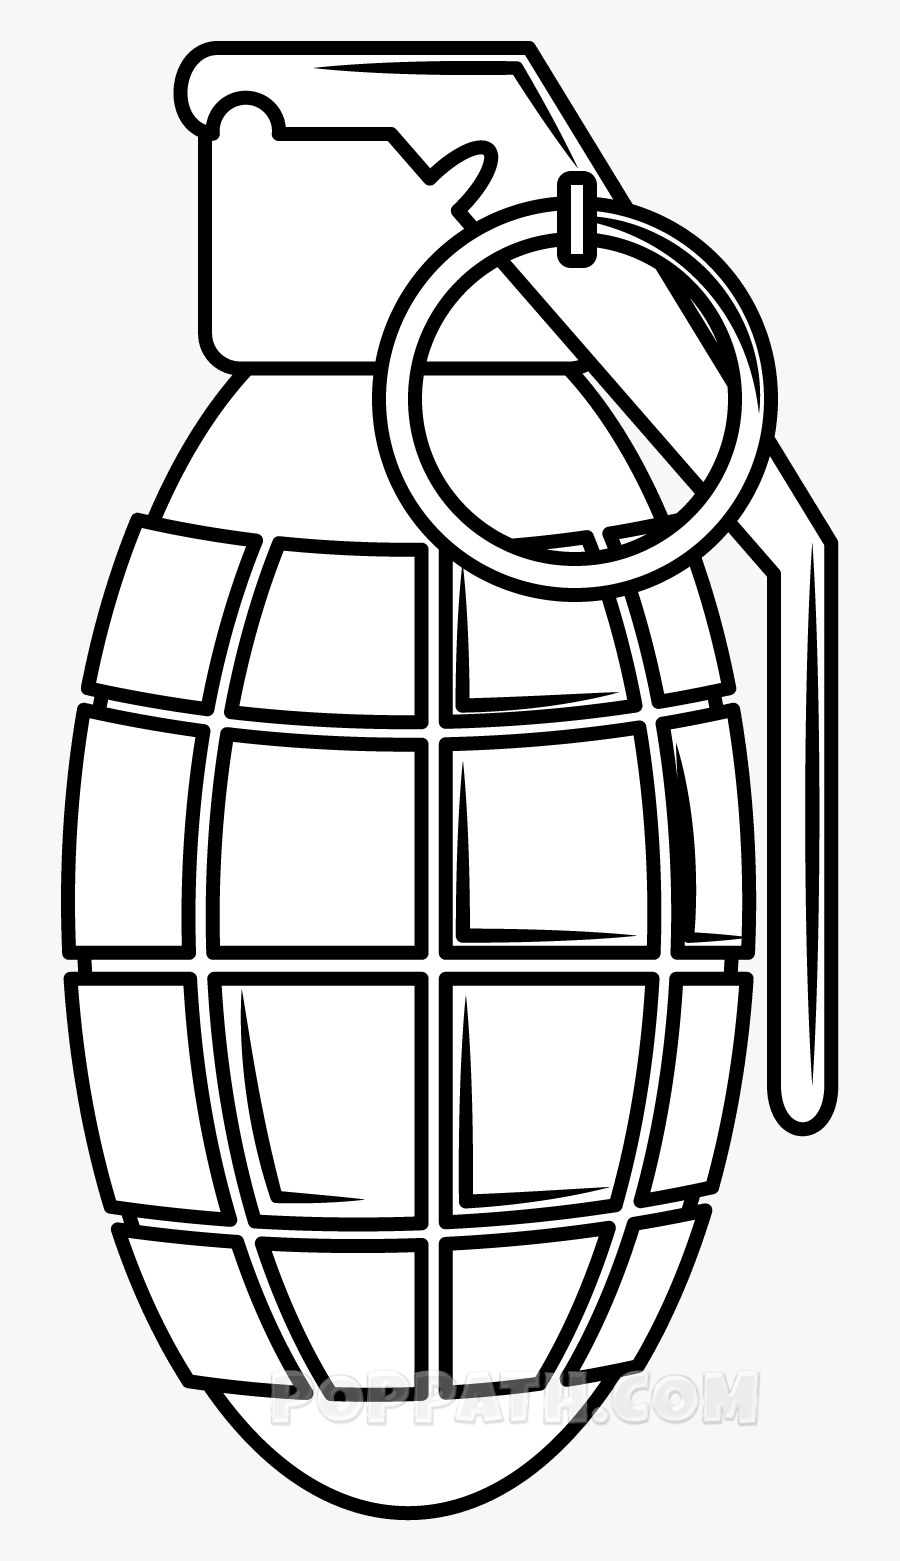 How To Draw A - Grenade Clipart, Transparent Clipart